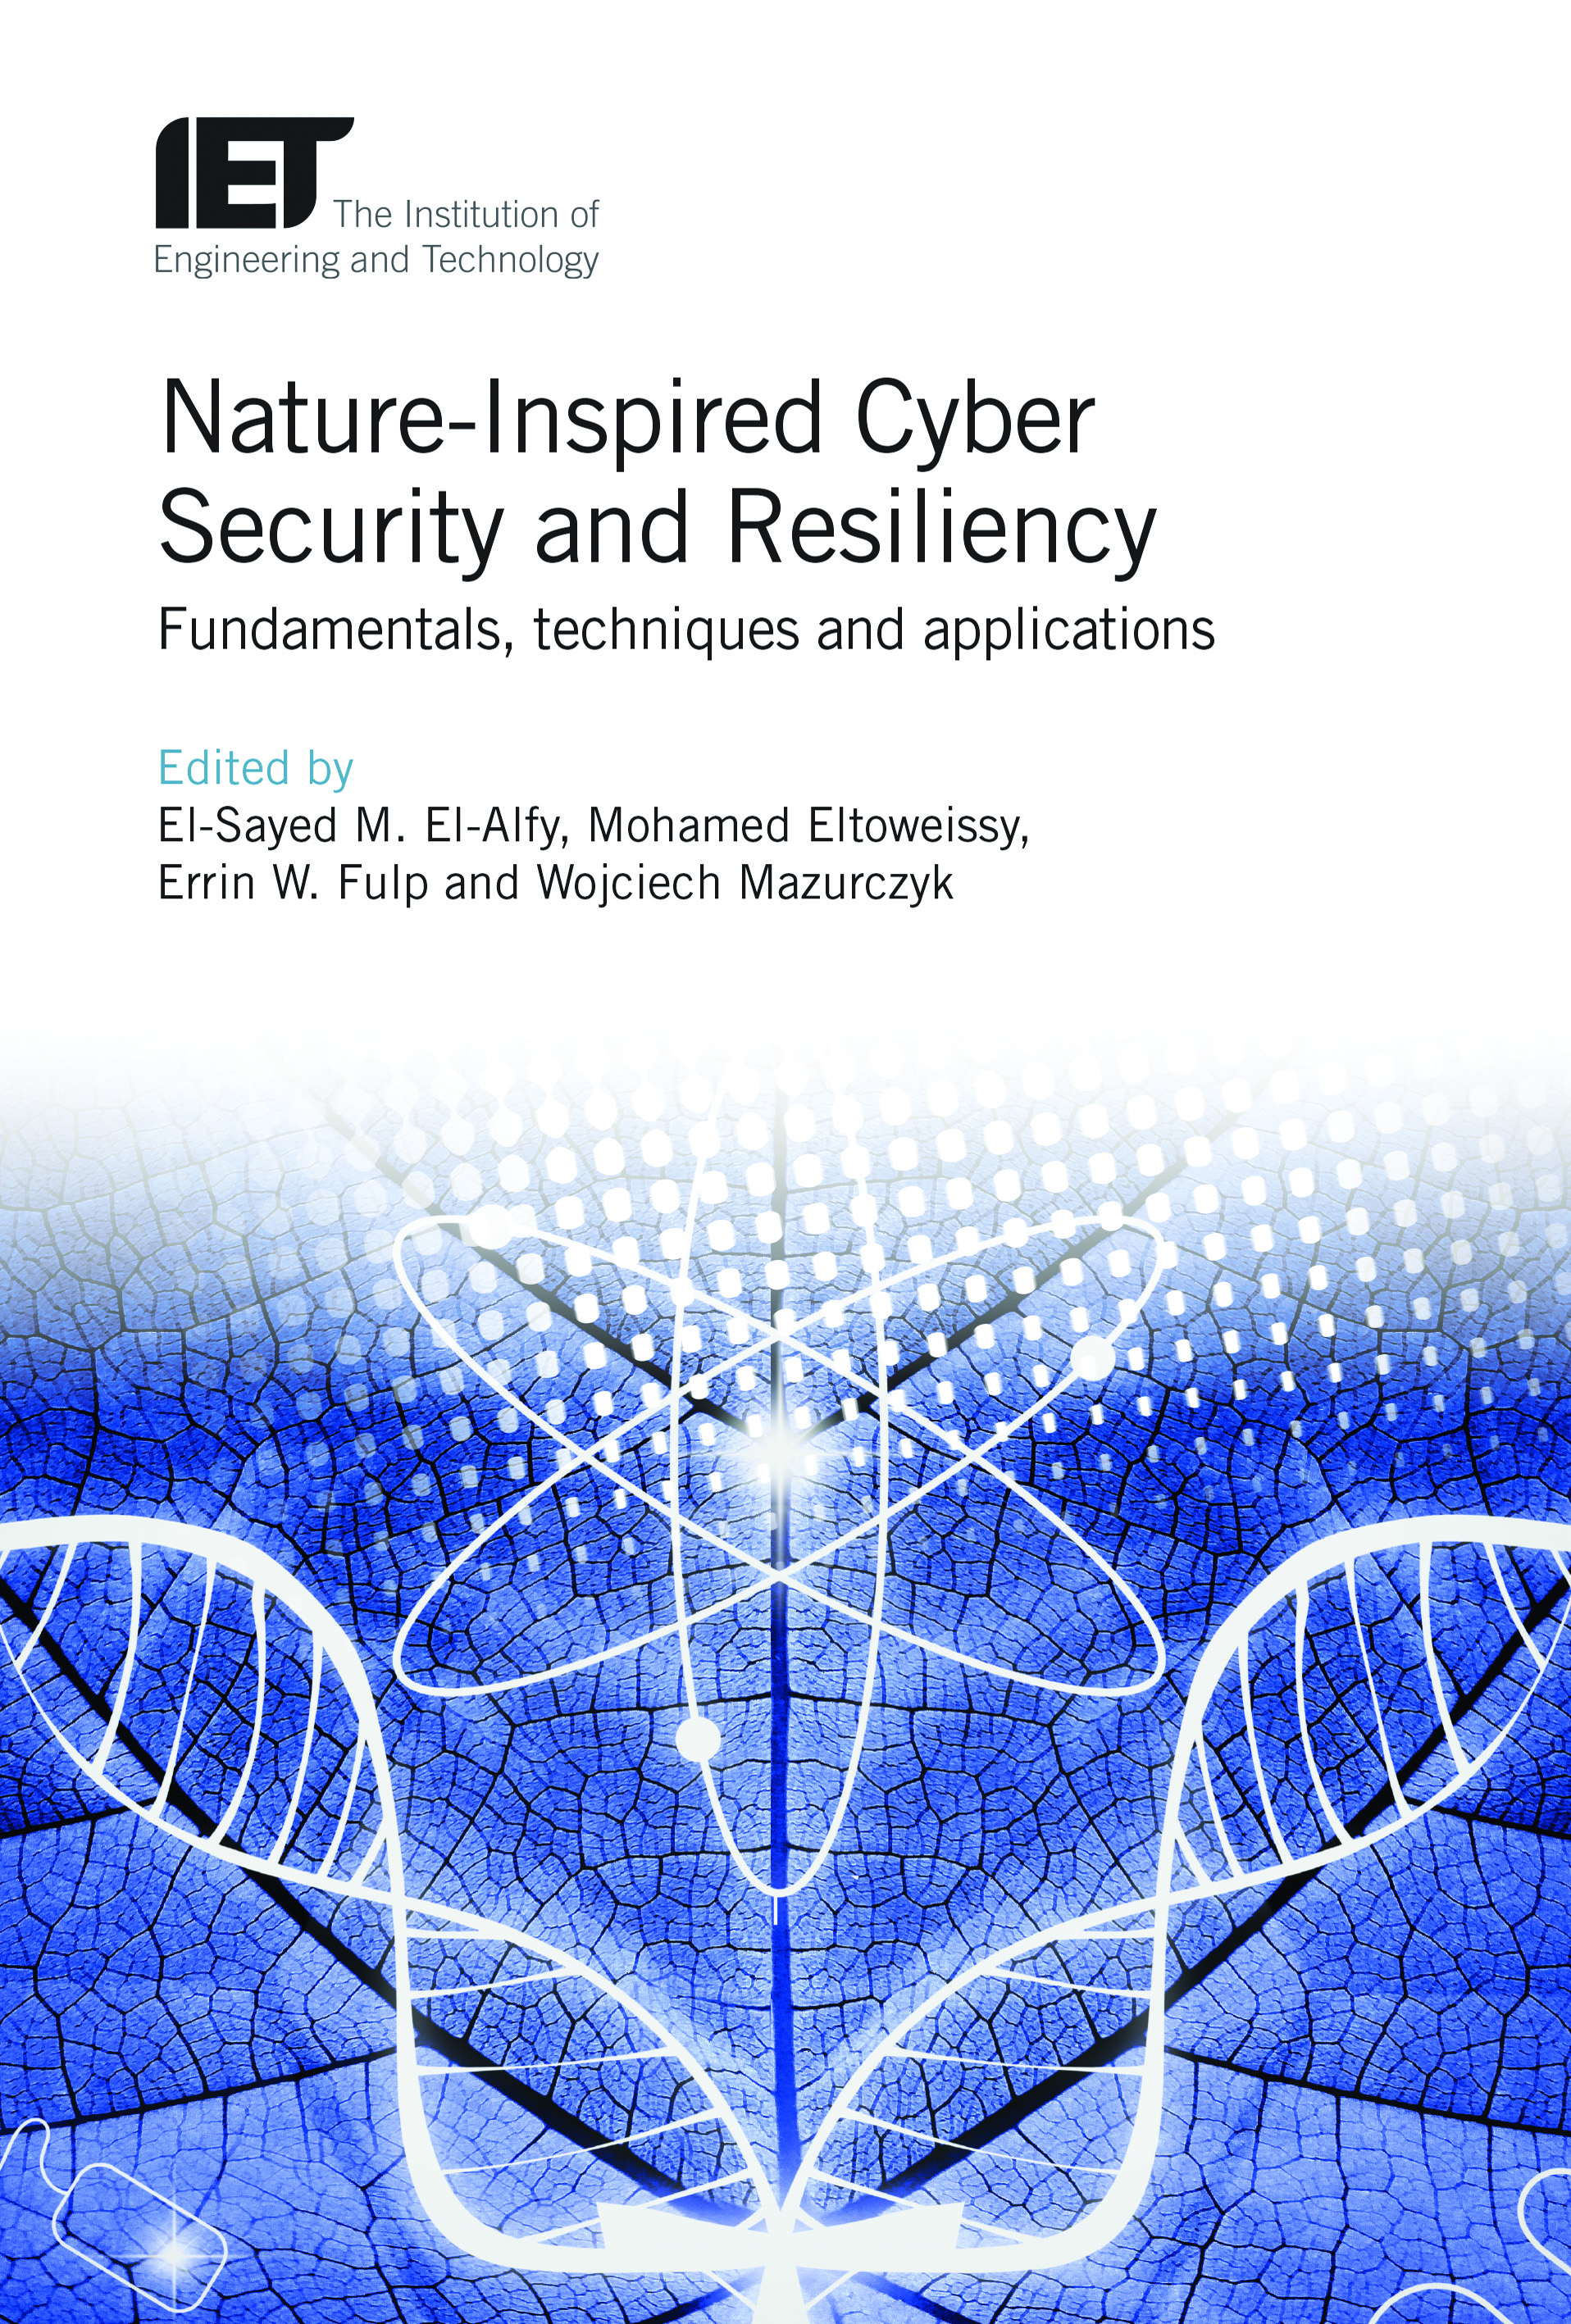 Nature-Inspired Cyber Security and Resiliency, Fundamentals, techniques and applications